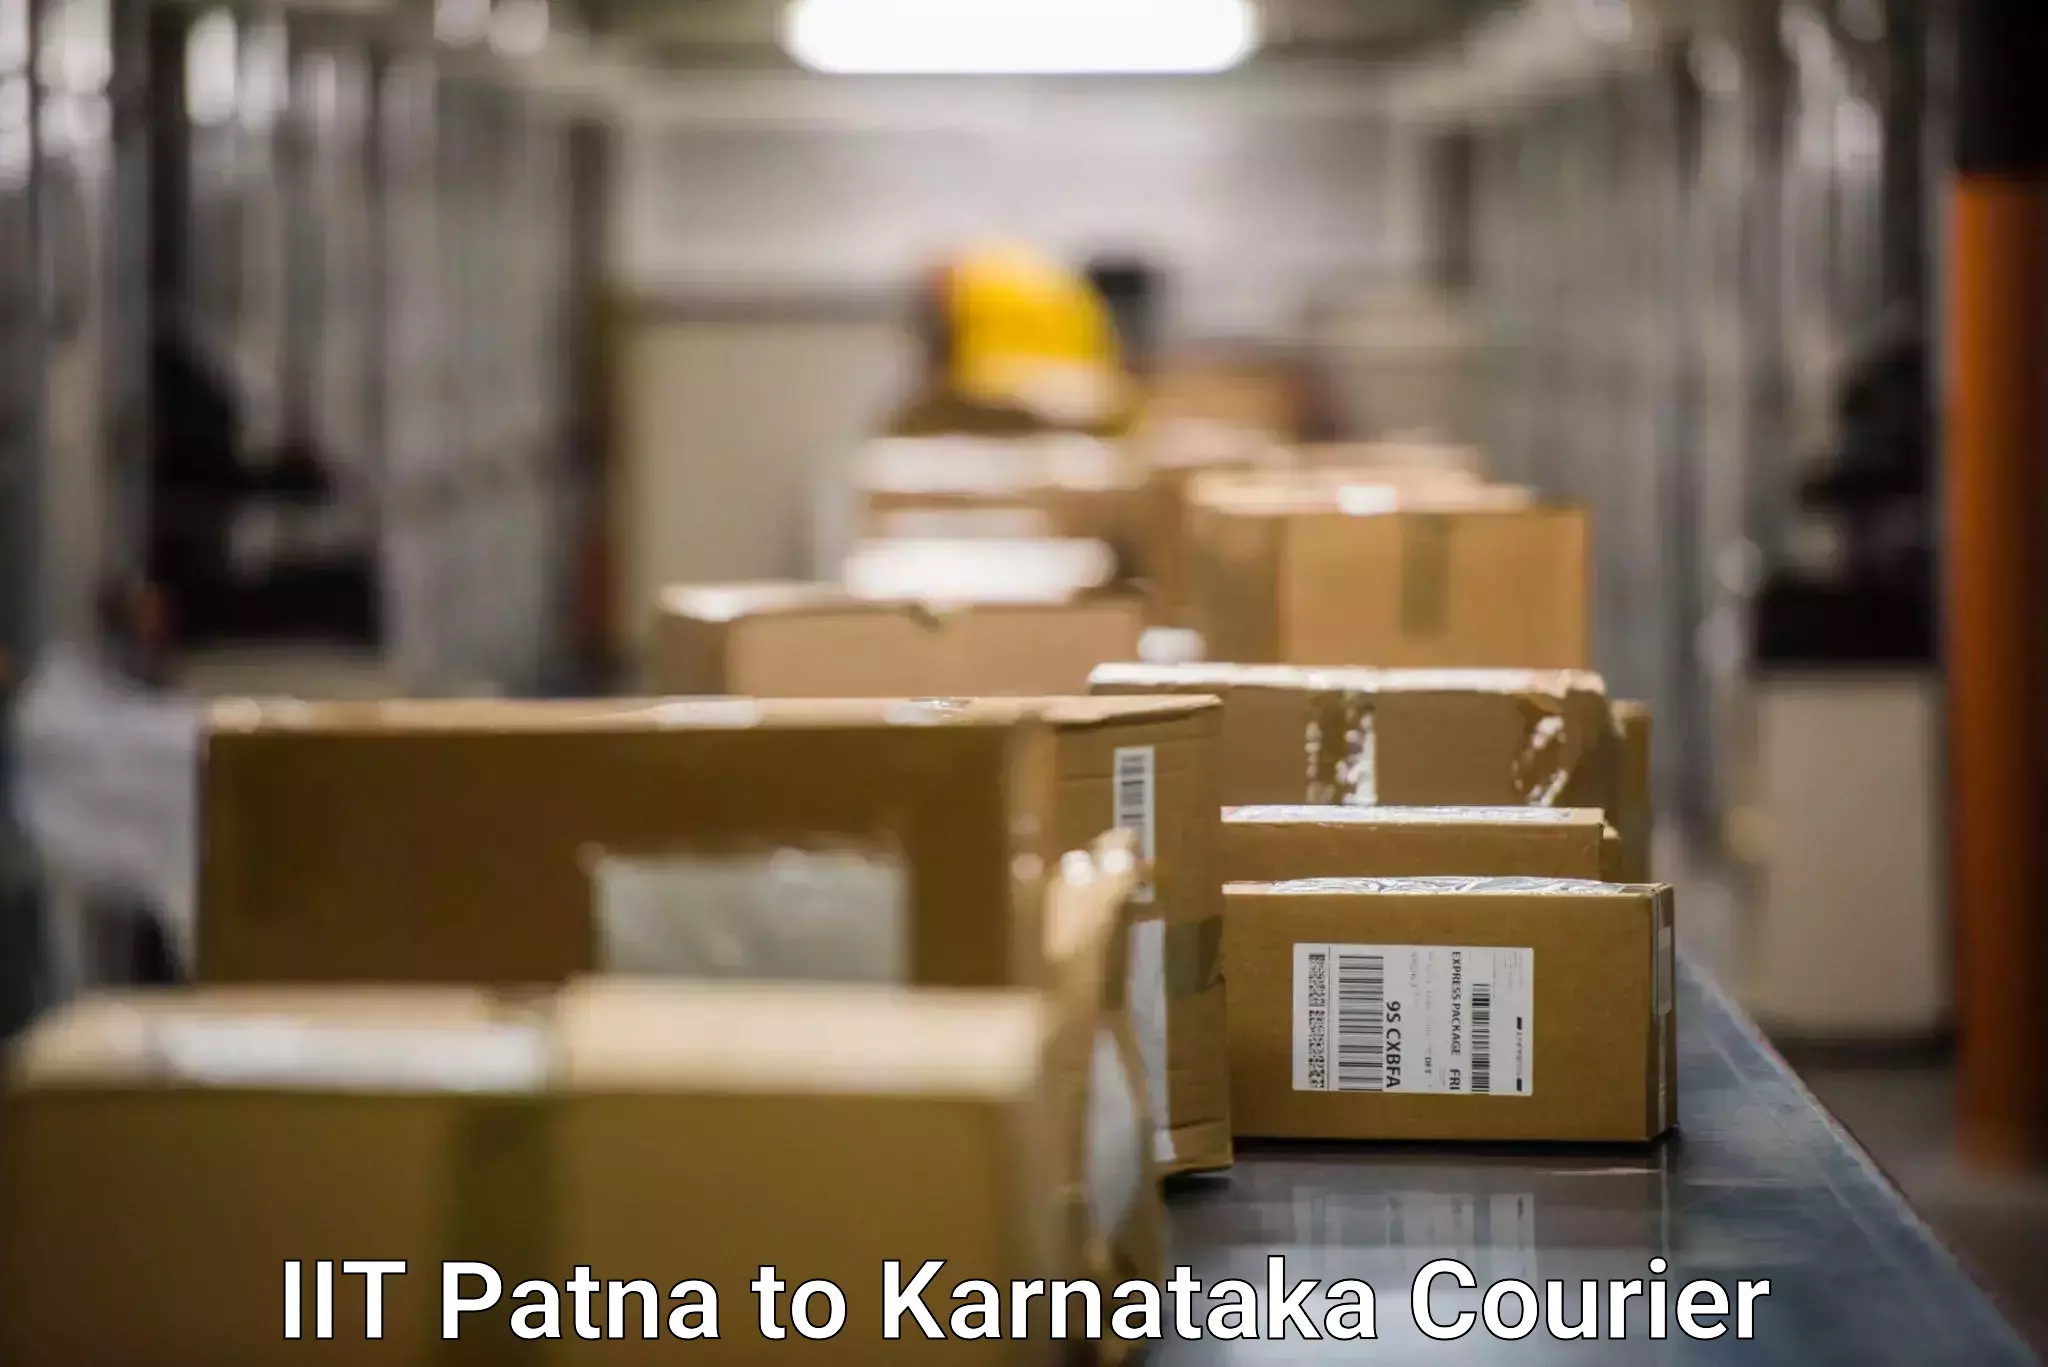 Express package delivery IIT Patna to Channapatna